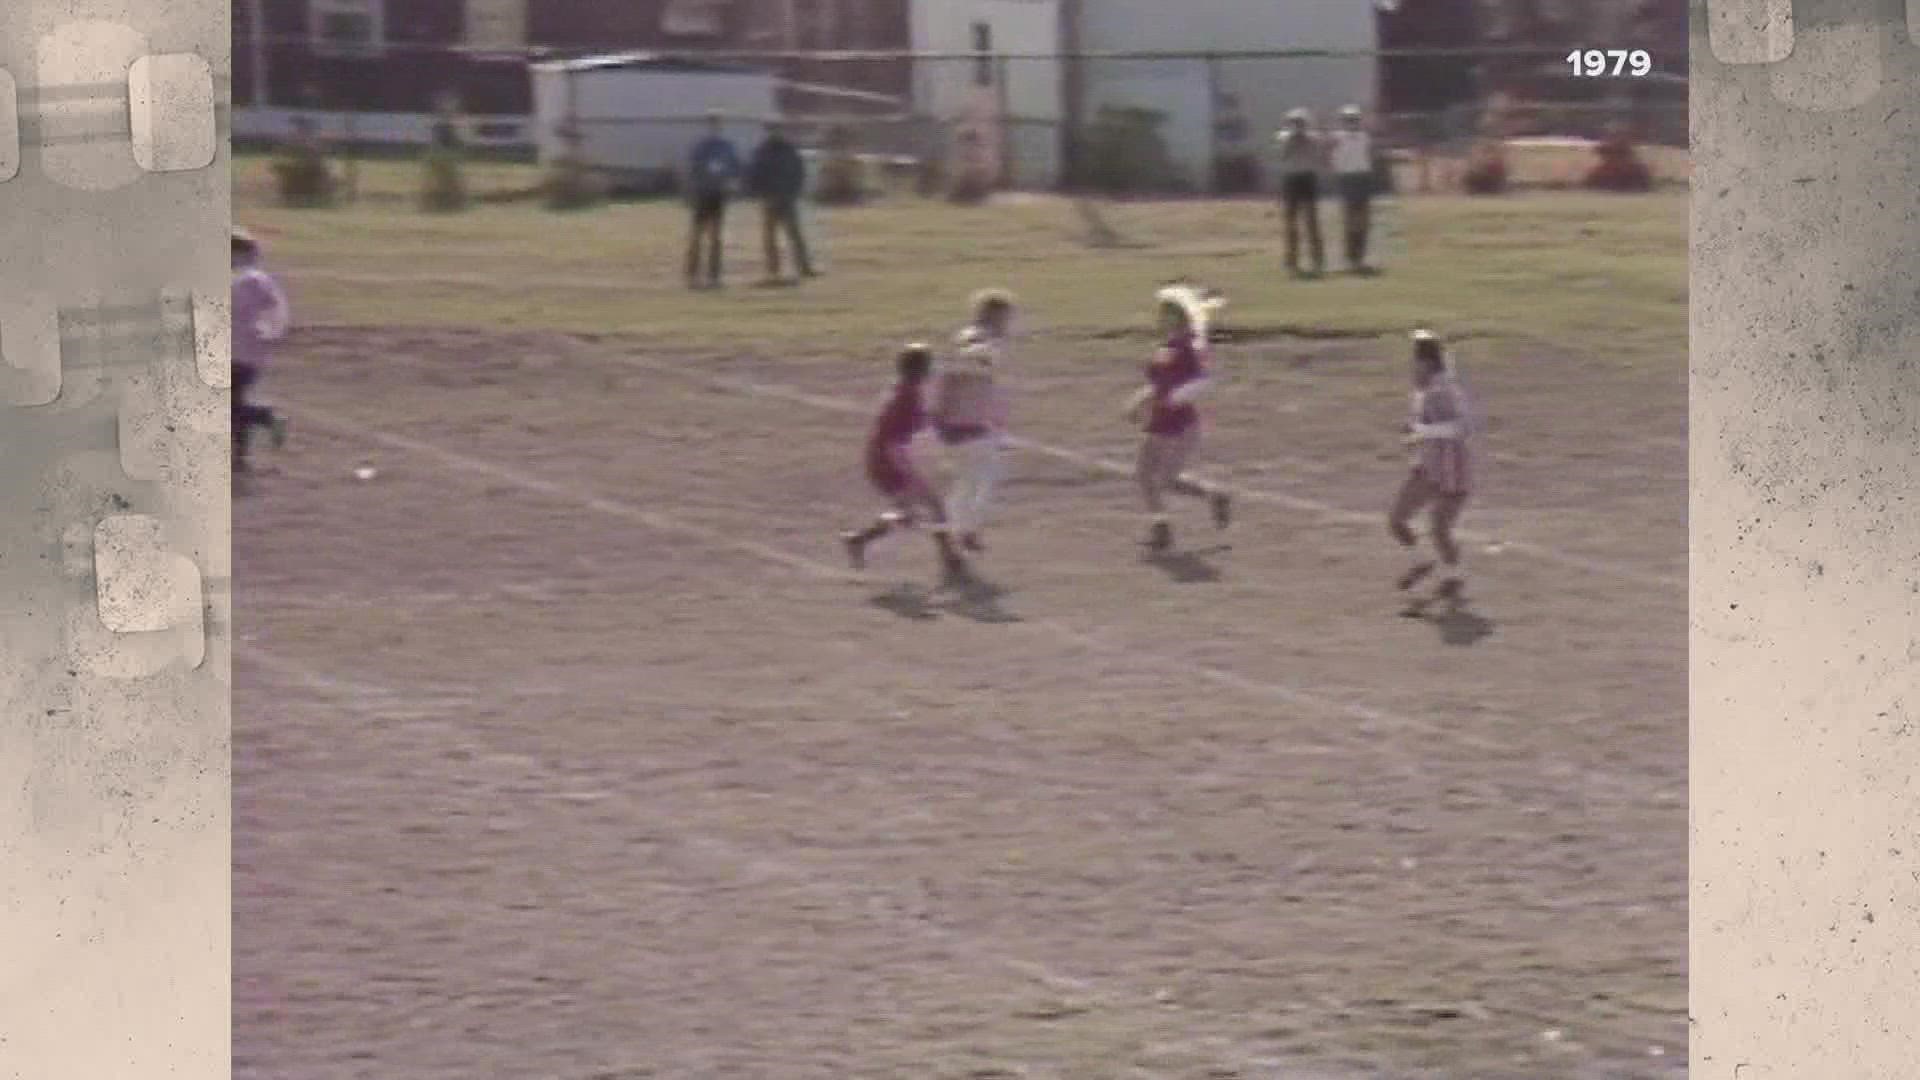 Girls soccer is one of the most popular youth sports in the United States. That wasn't always the case, especially in the 1970s.